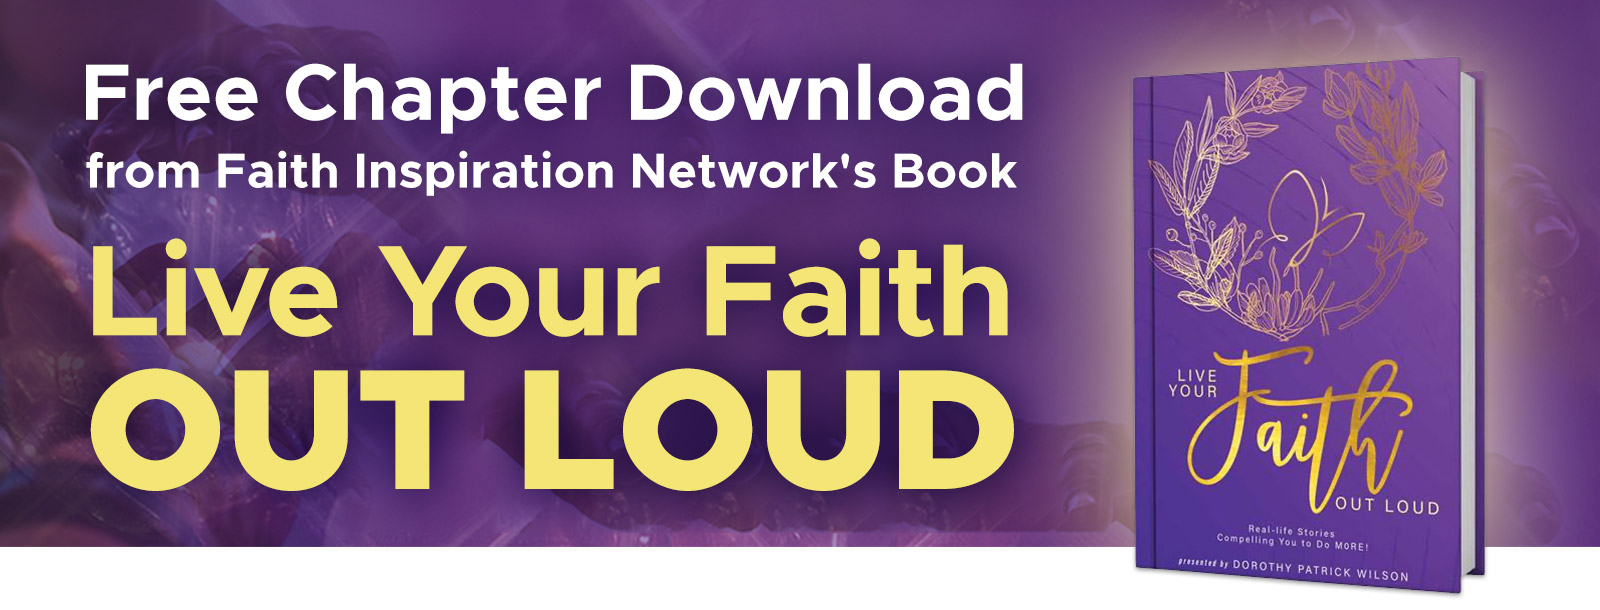 Free Chapter Download from Faith Inspiration Network's Book 'Live Your Faith Out Loud'